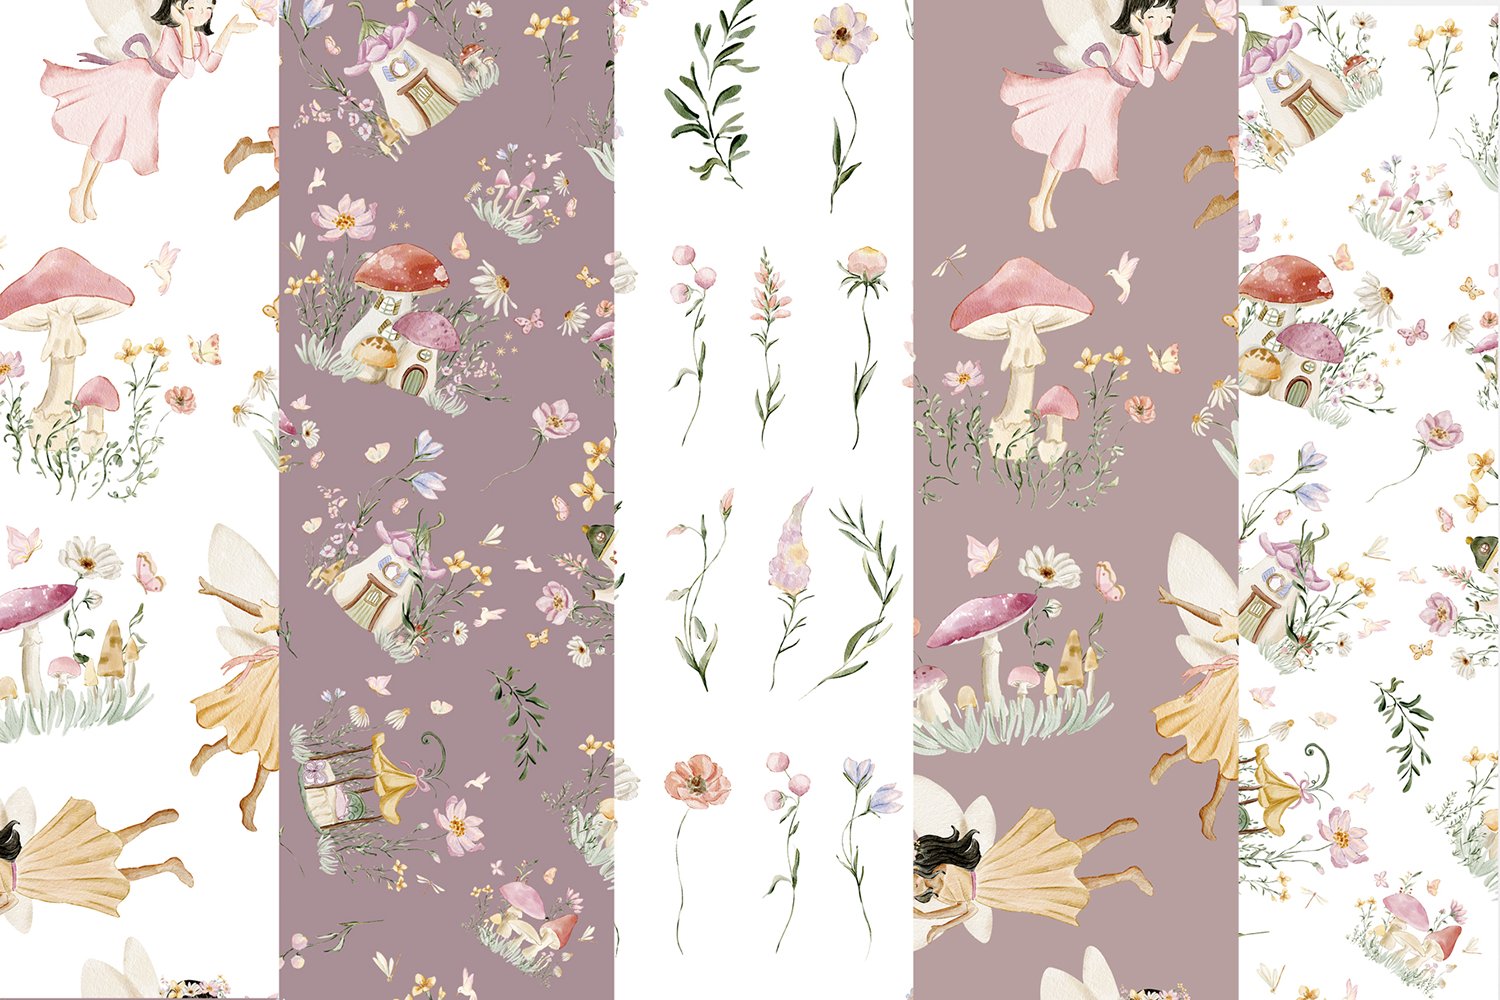 Pastel patterns with fairies.